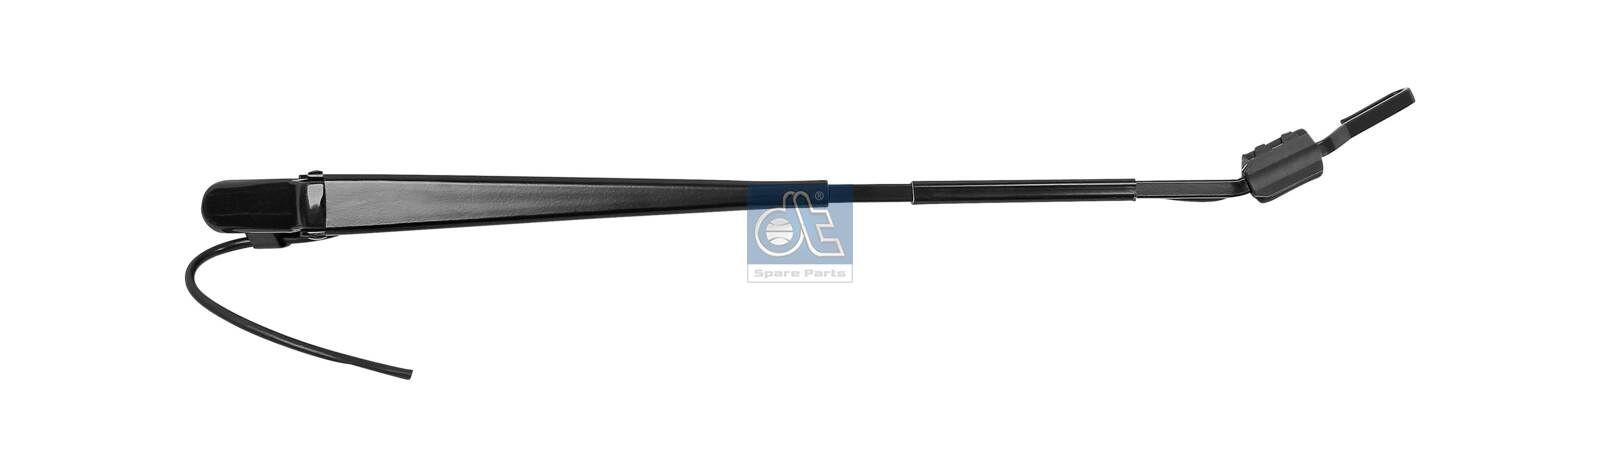 DT Spare Parts 4.63610 Wiper Arm, windscreen washer 941 820 03 44